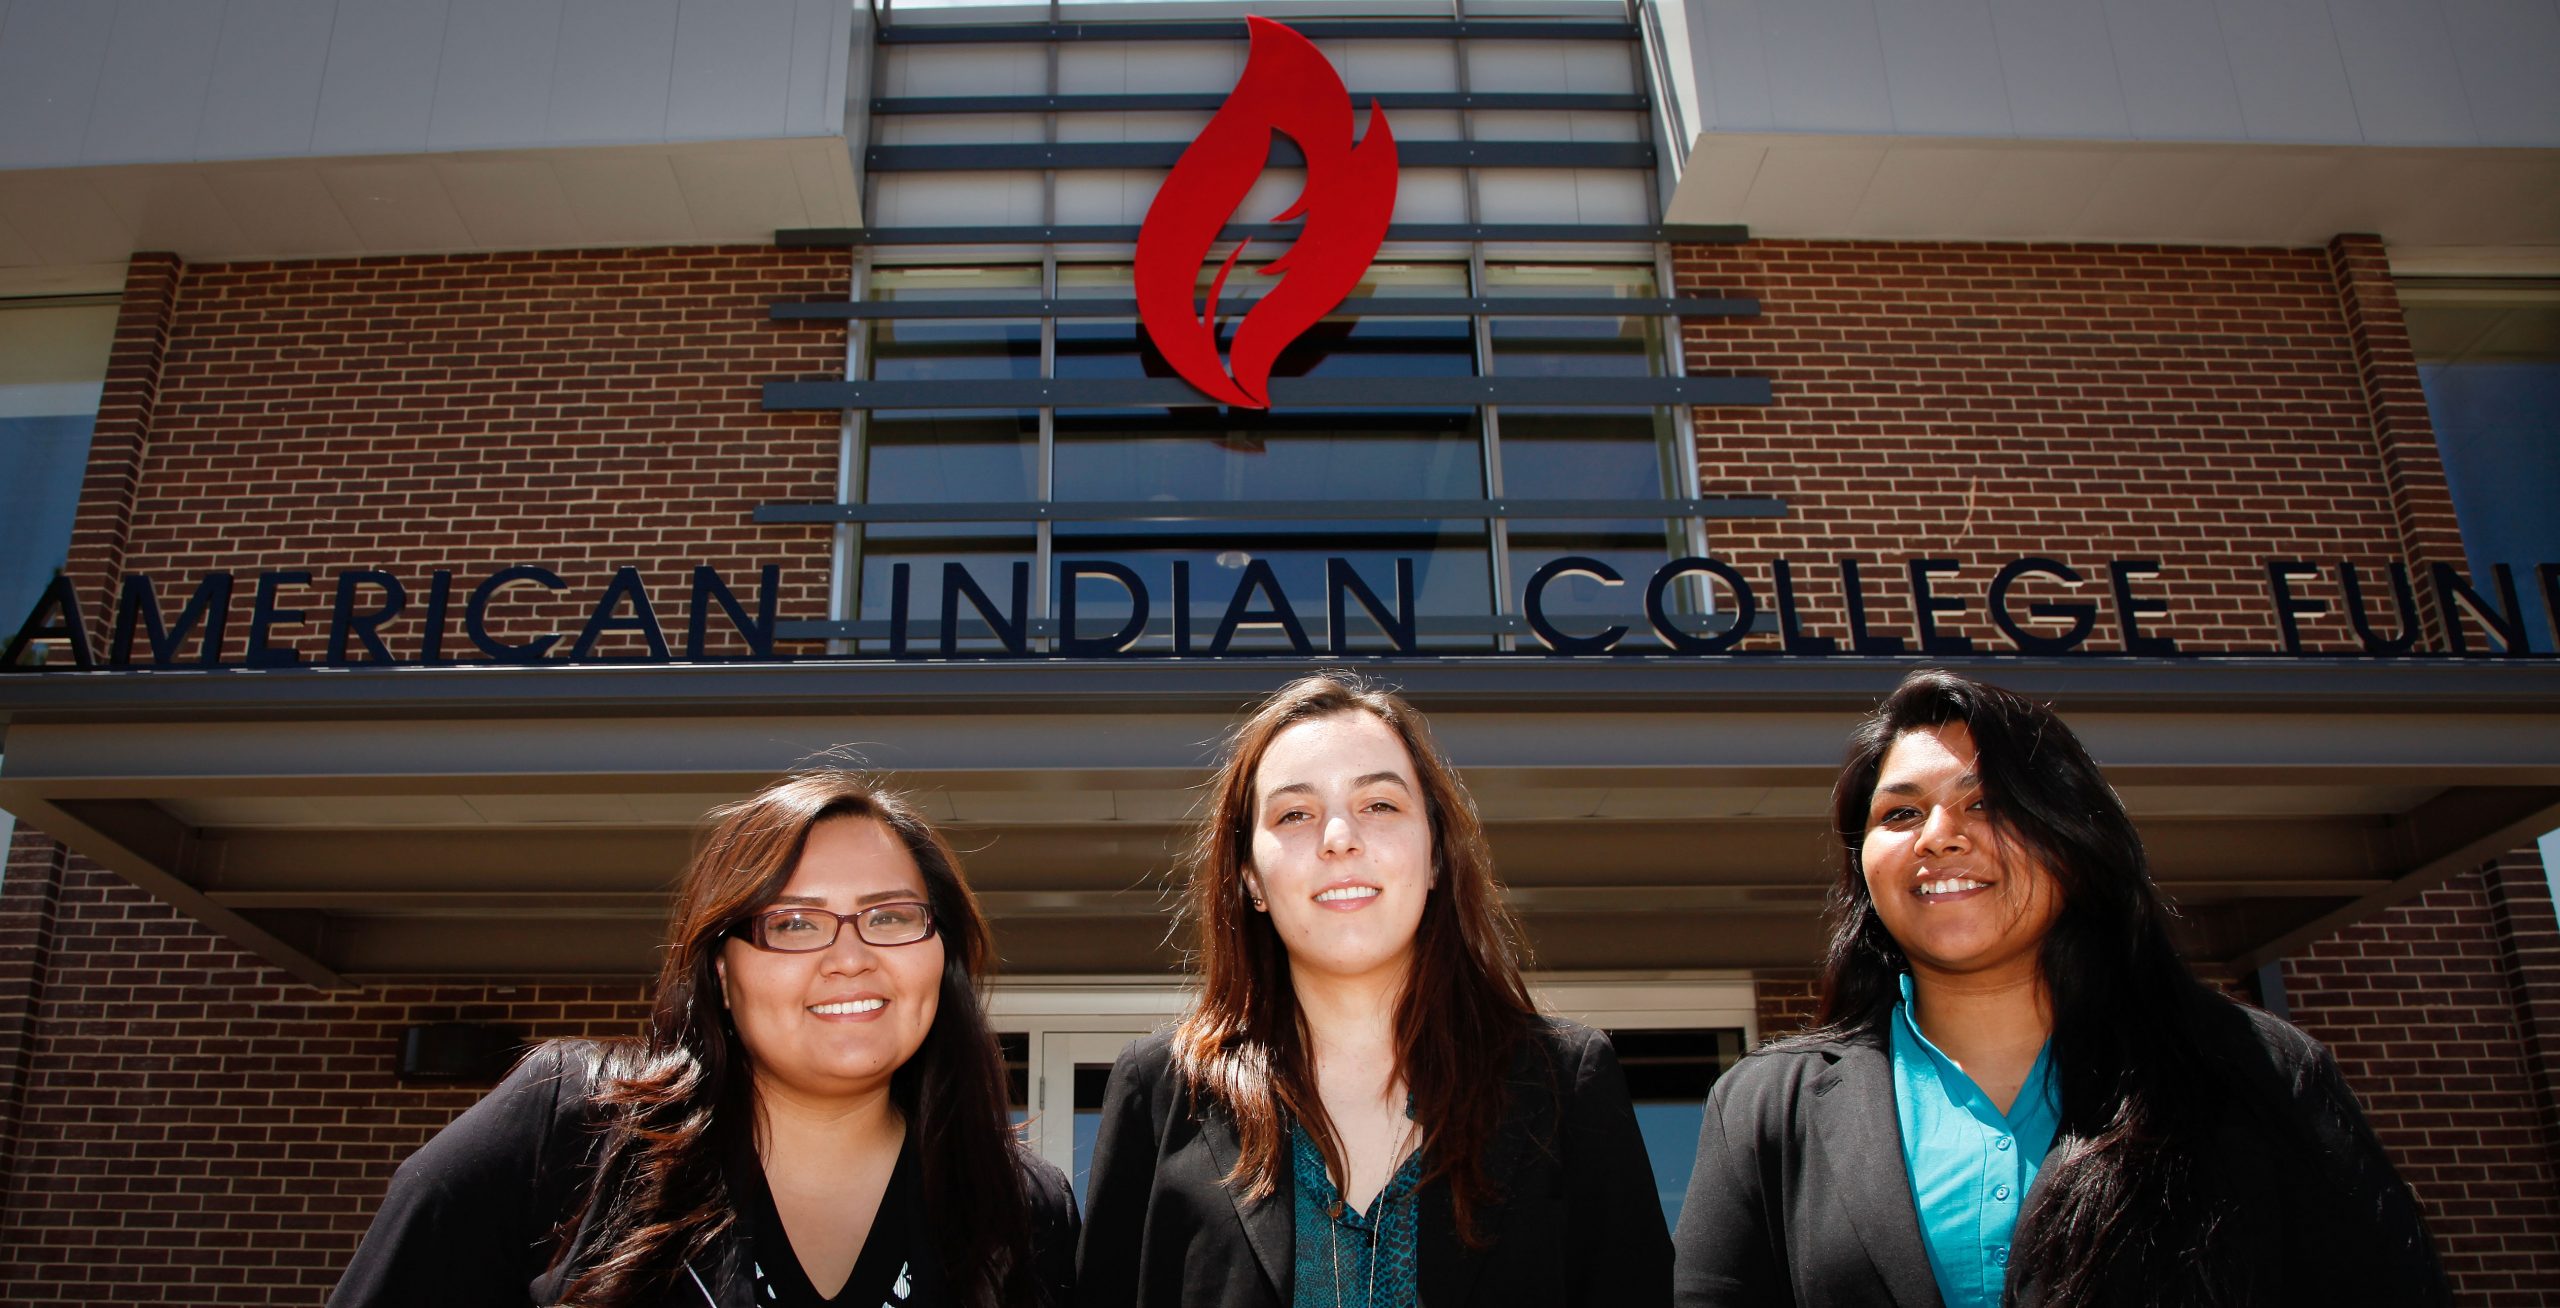 This year the College Fund welcomes three research interns to its staff.